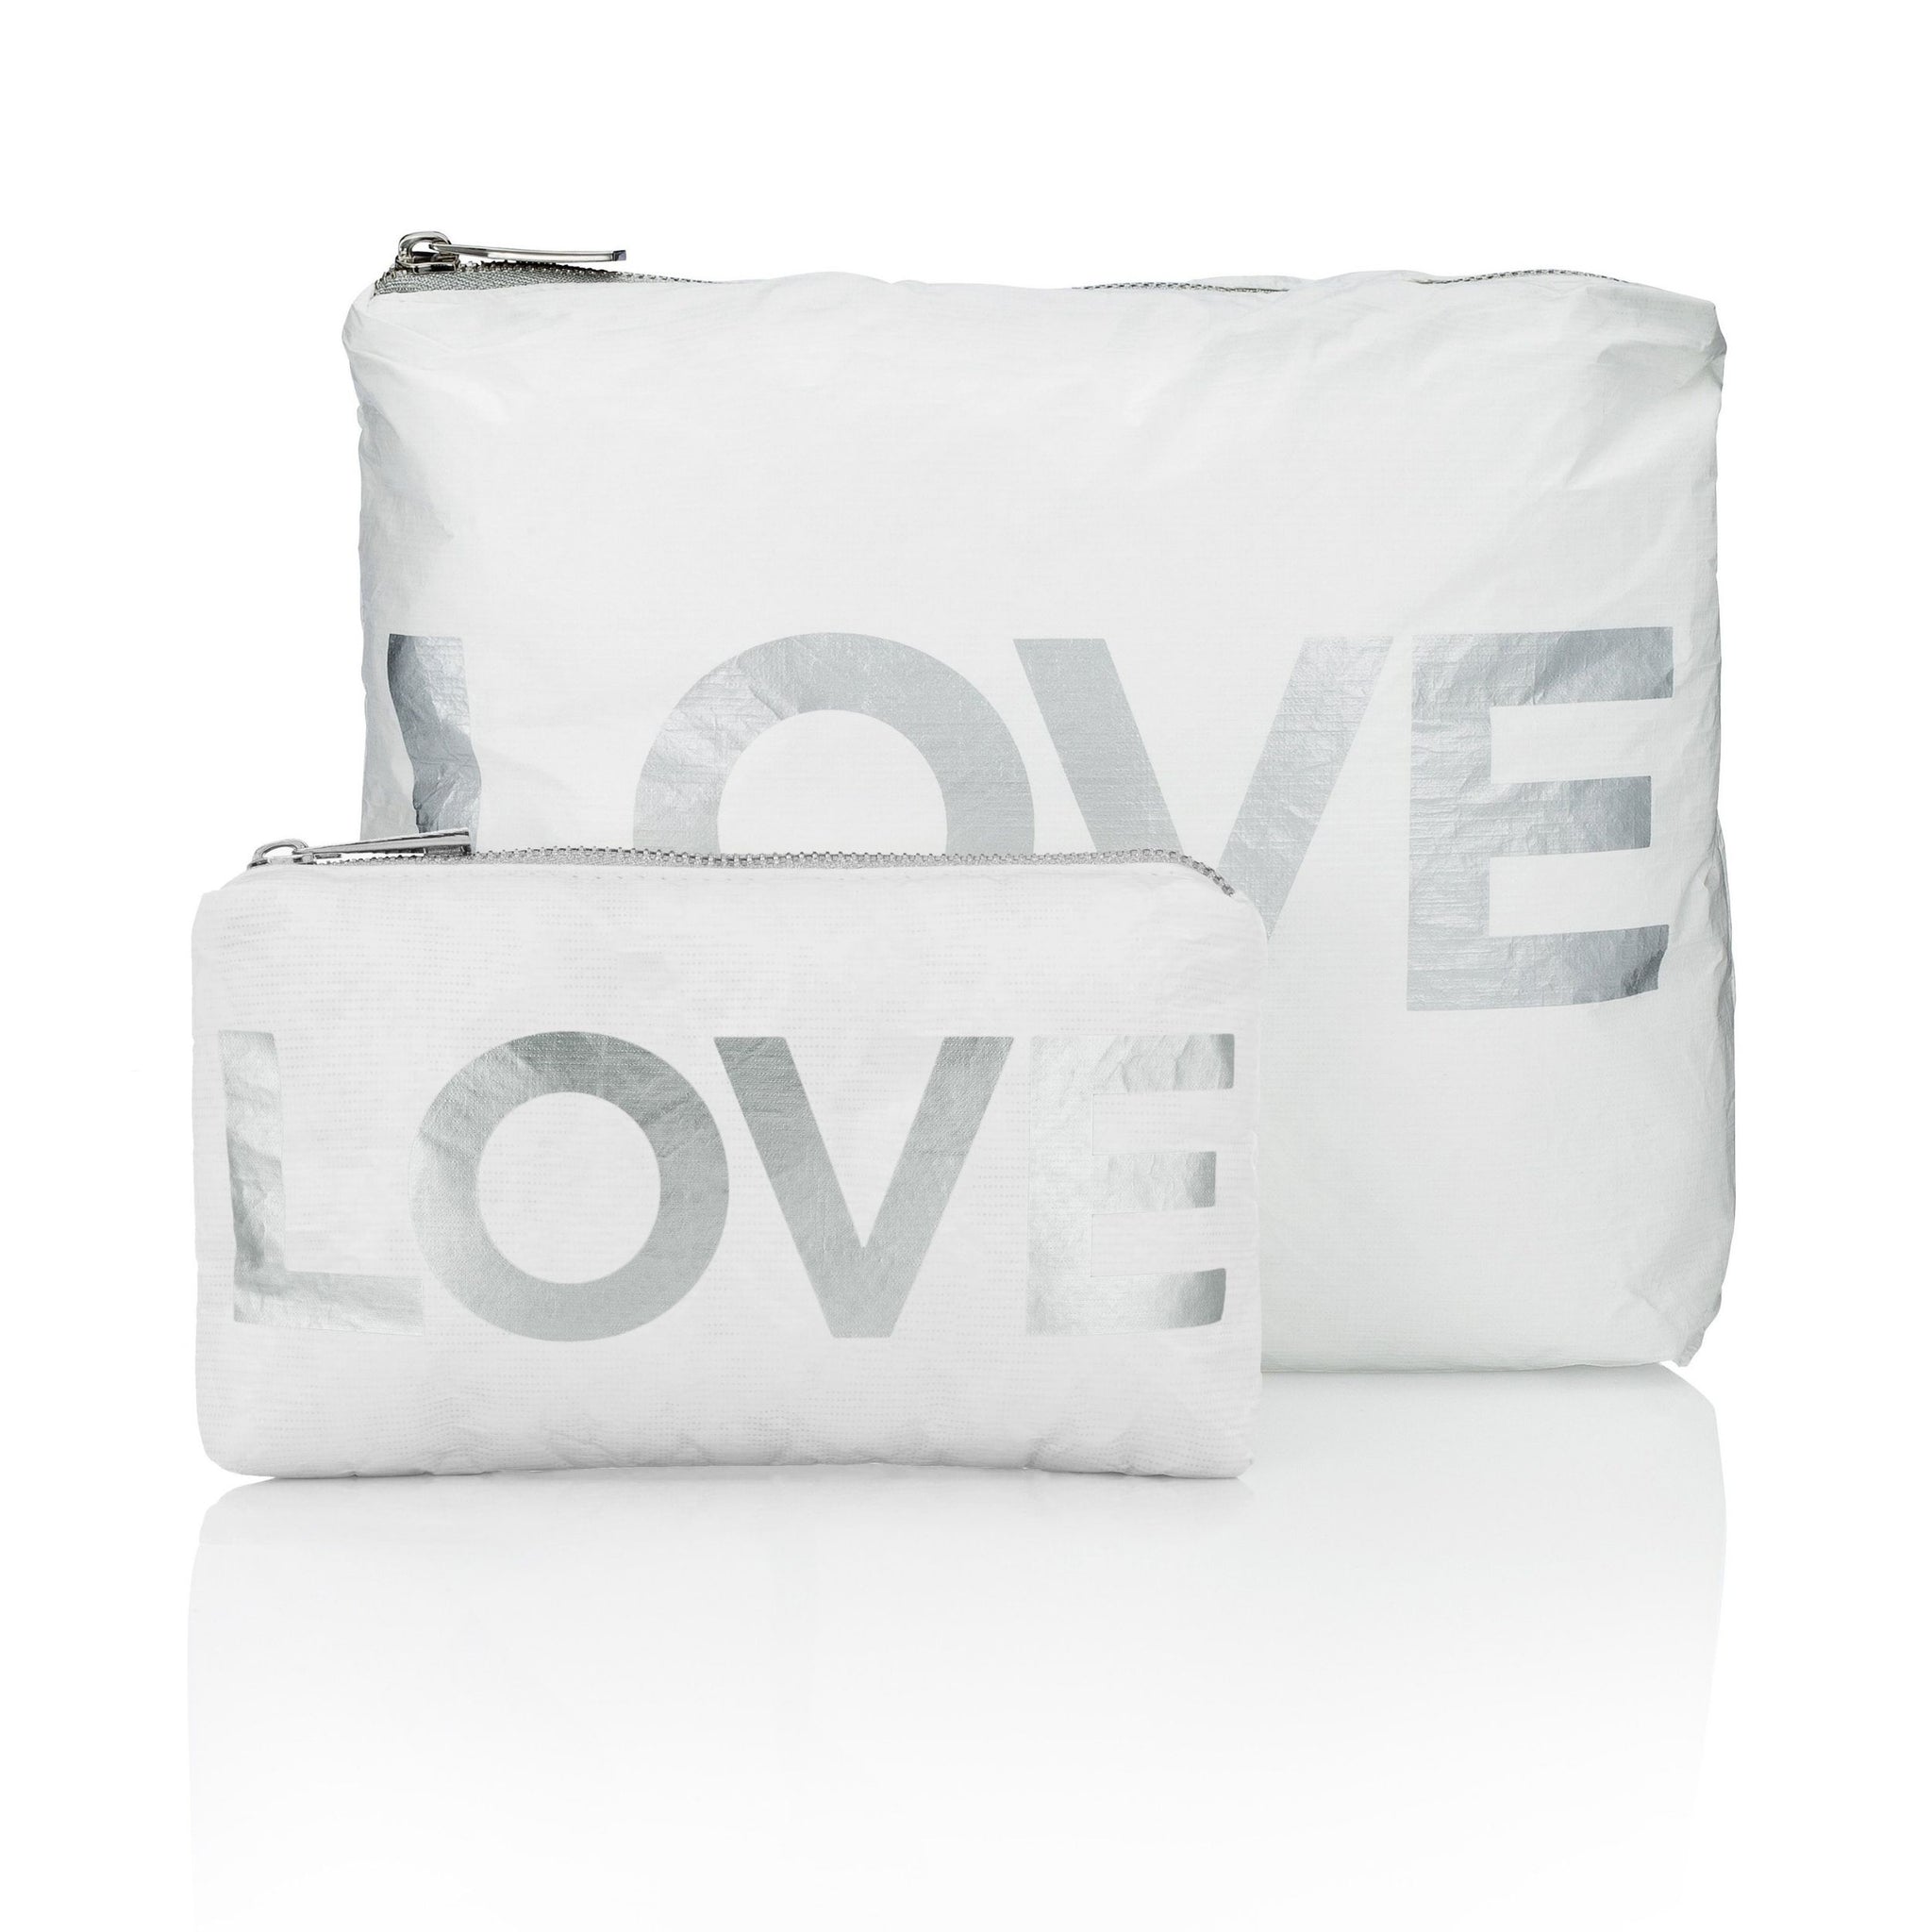 Set of two organizational packs in shimmer white with silver "LOVE"